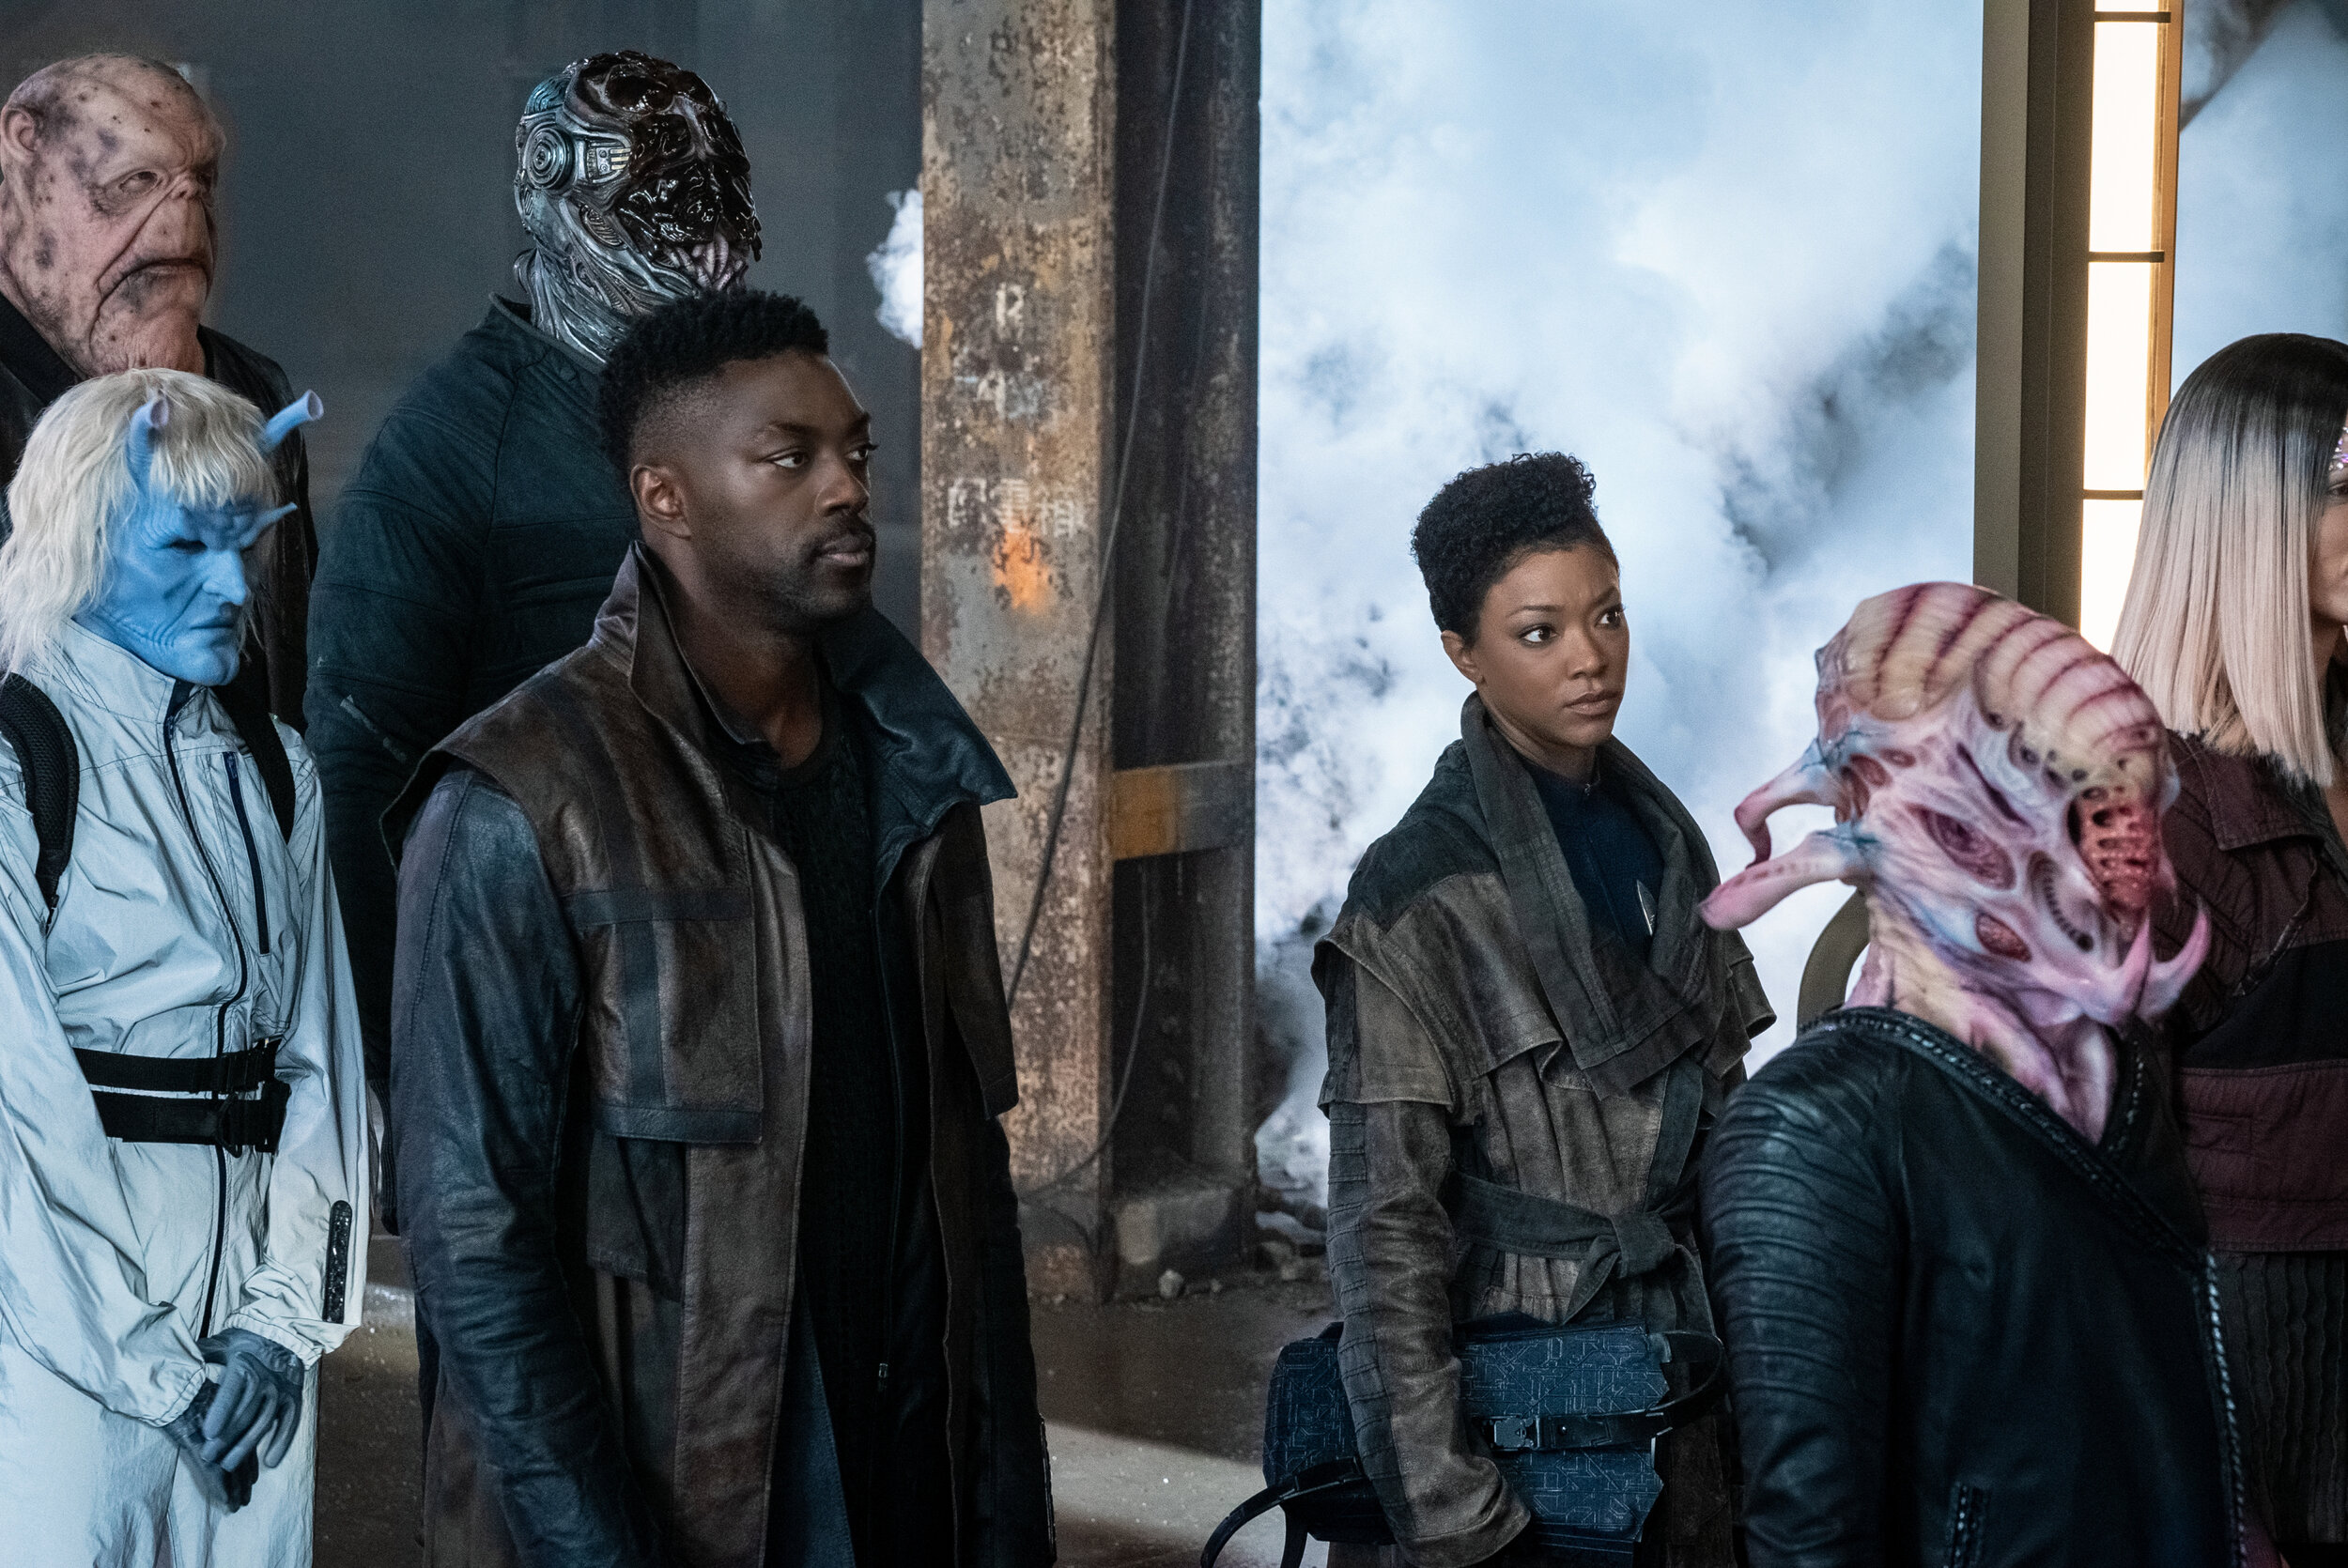  Pictured (L-R): David Ajala as Book and Sonequa Martin-Green as Burnham; of the CBS All Access series STAR TREK: DISCOVERY. Photo Cr: Michael Gibson/CBS ©2020 CBS Interactive, Inc. All Rights Reserved. 